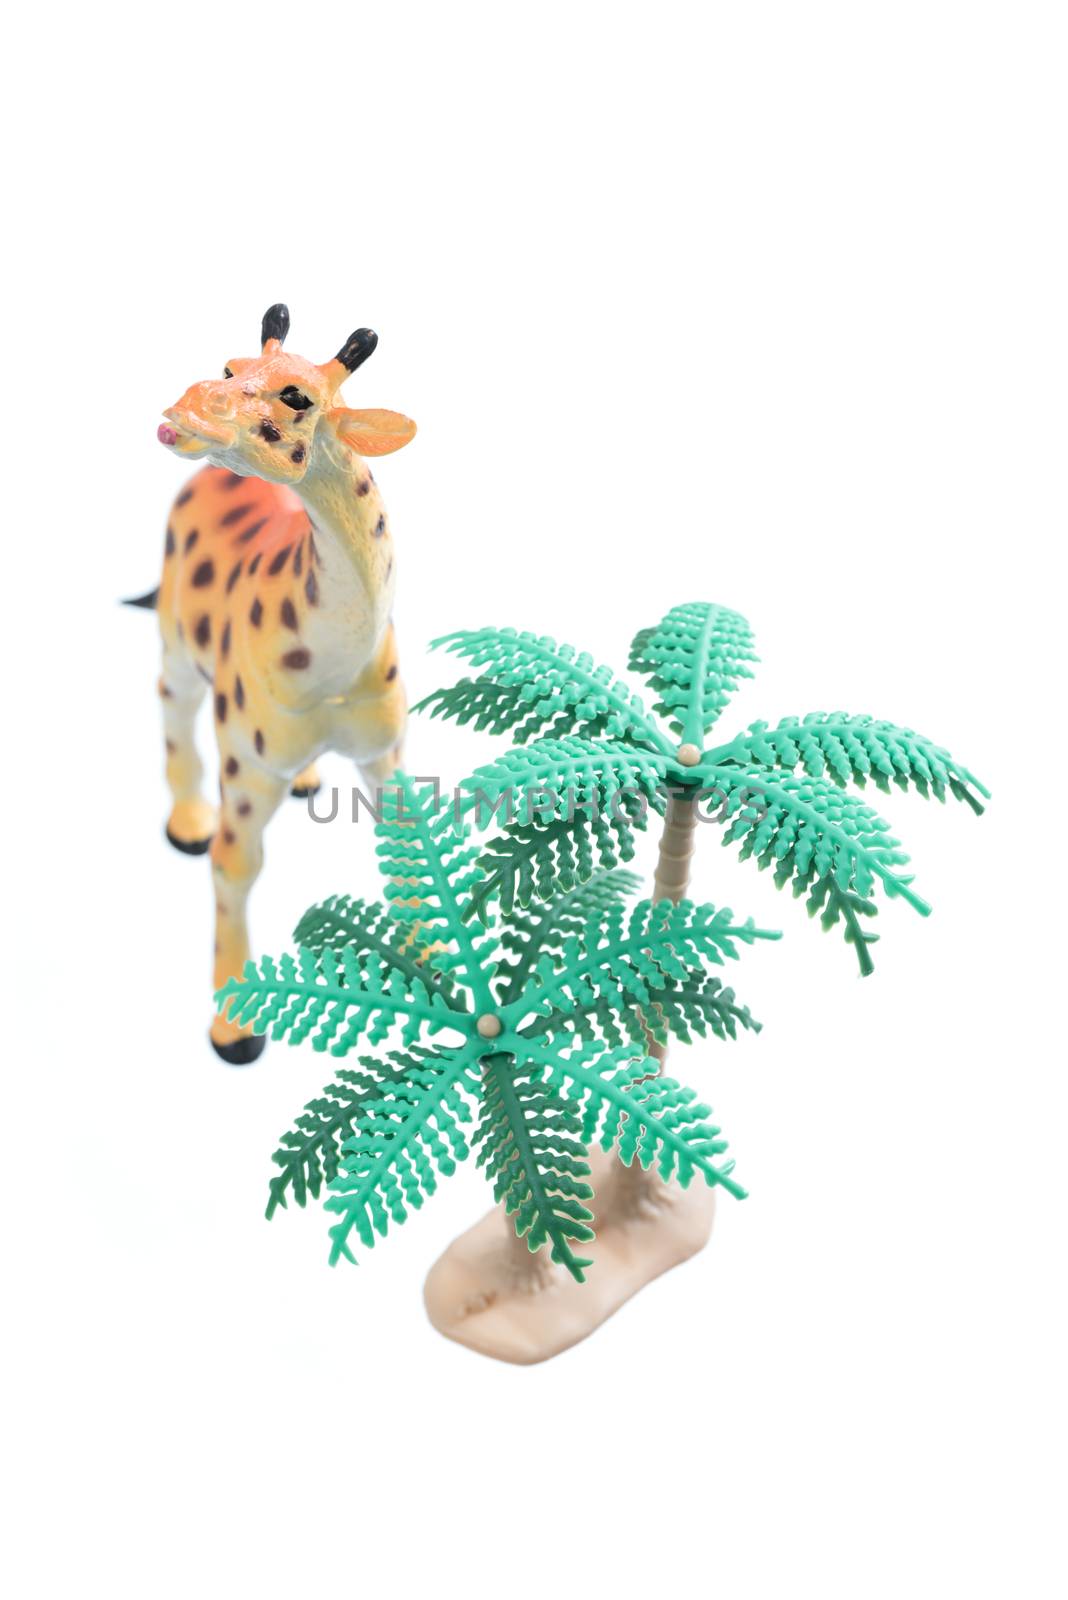 Toy Giraffe with Trees by justtscott